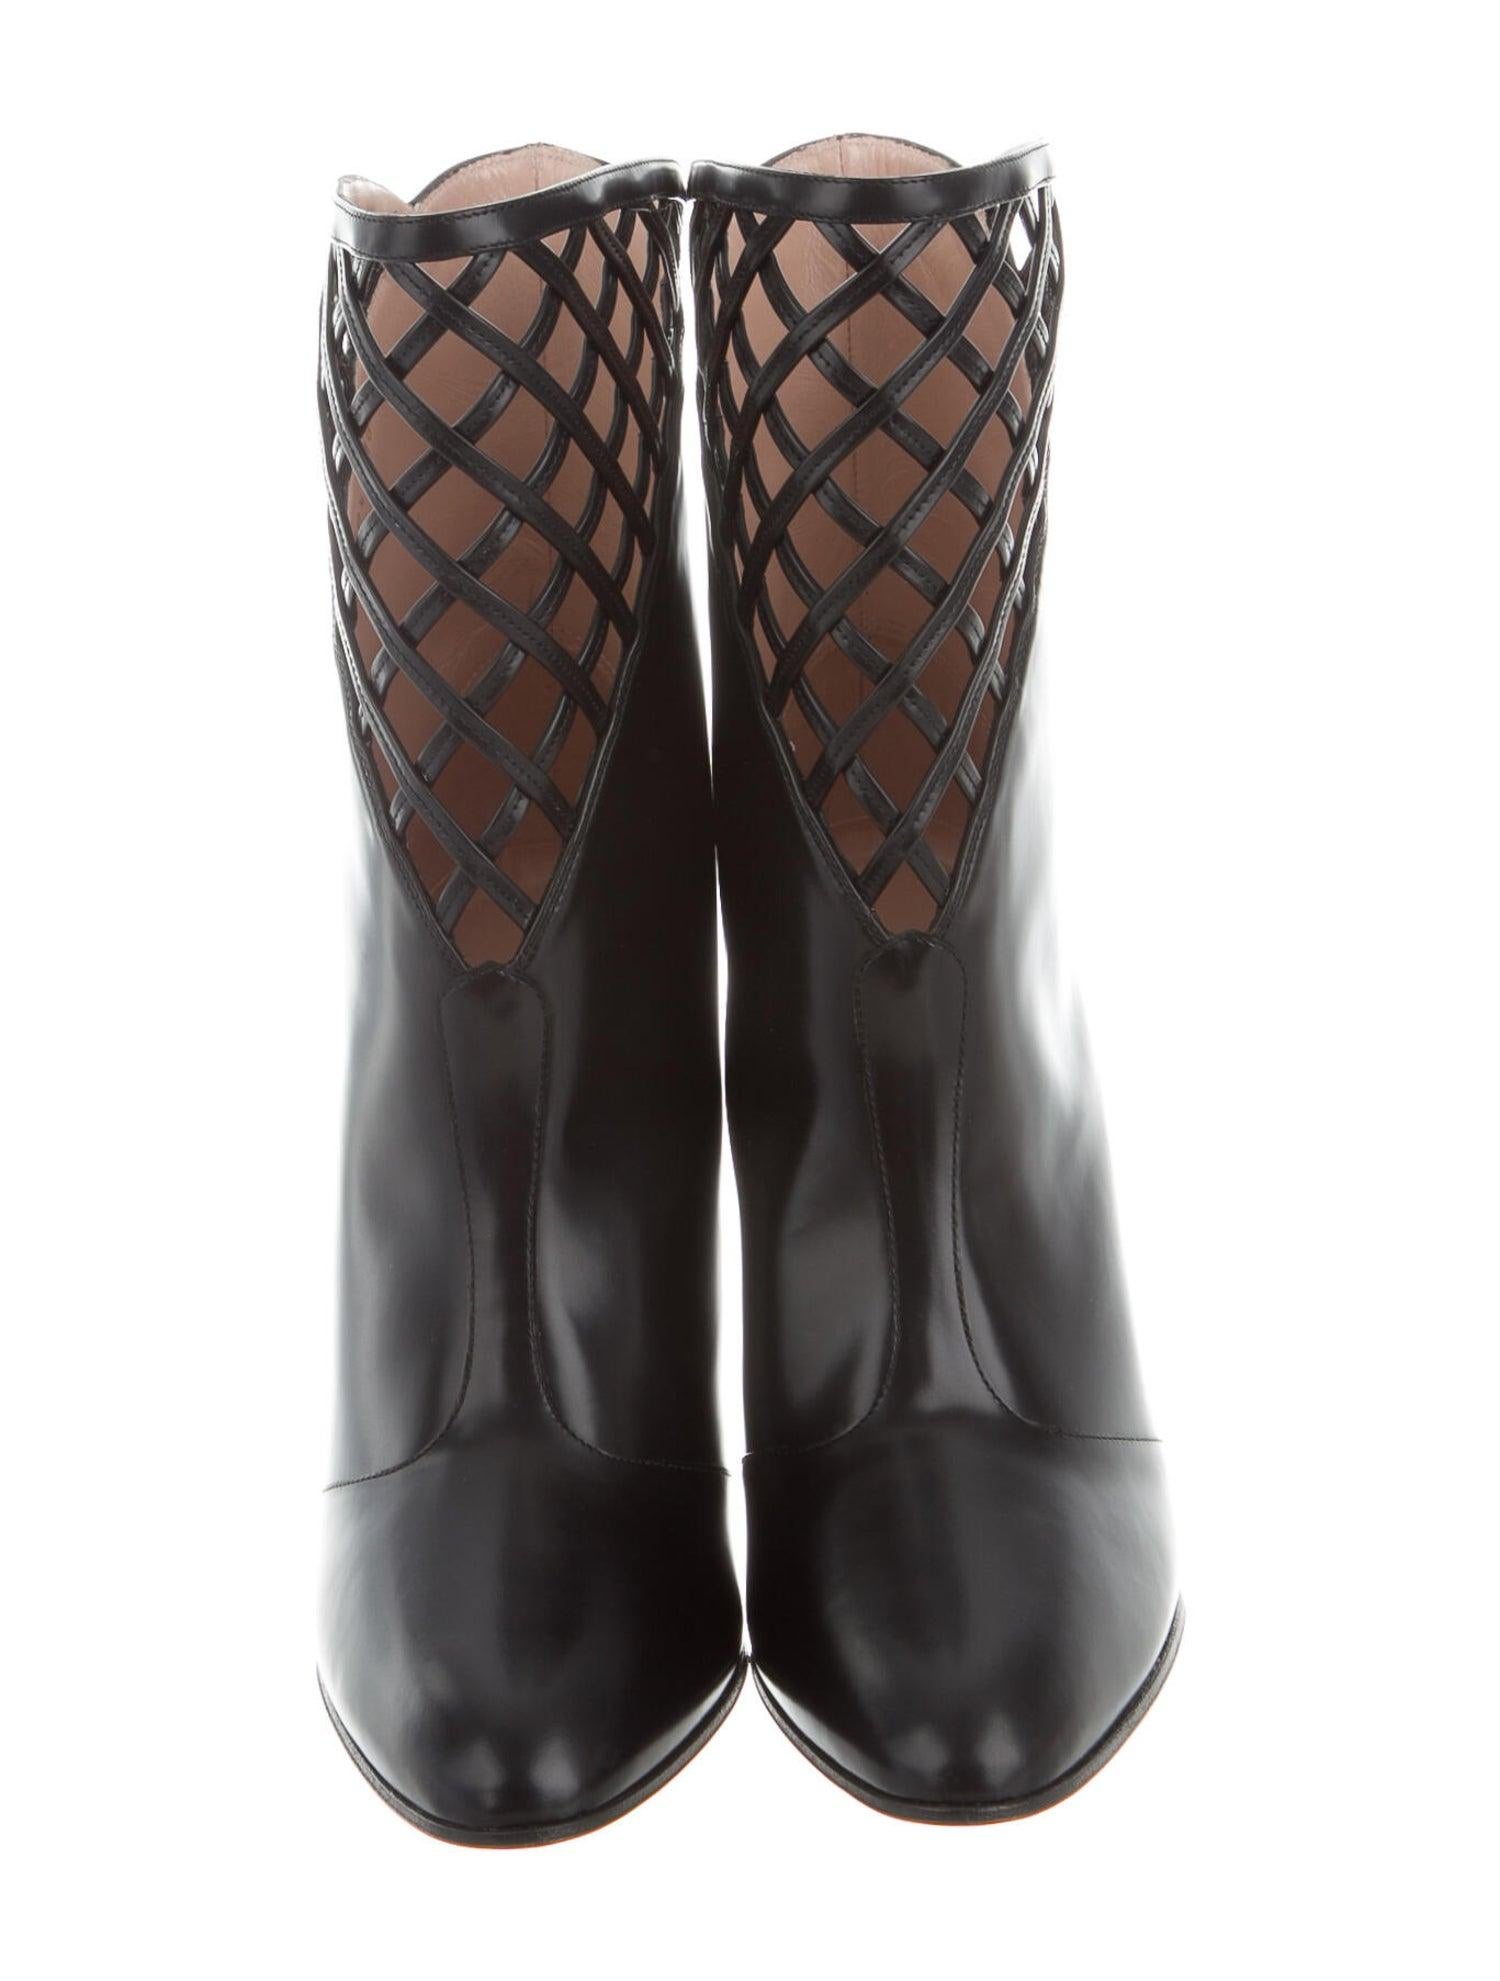 New Gucci Black Lattice Boots Booties With Box Sz 36.5 $2680 3